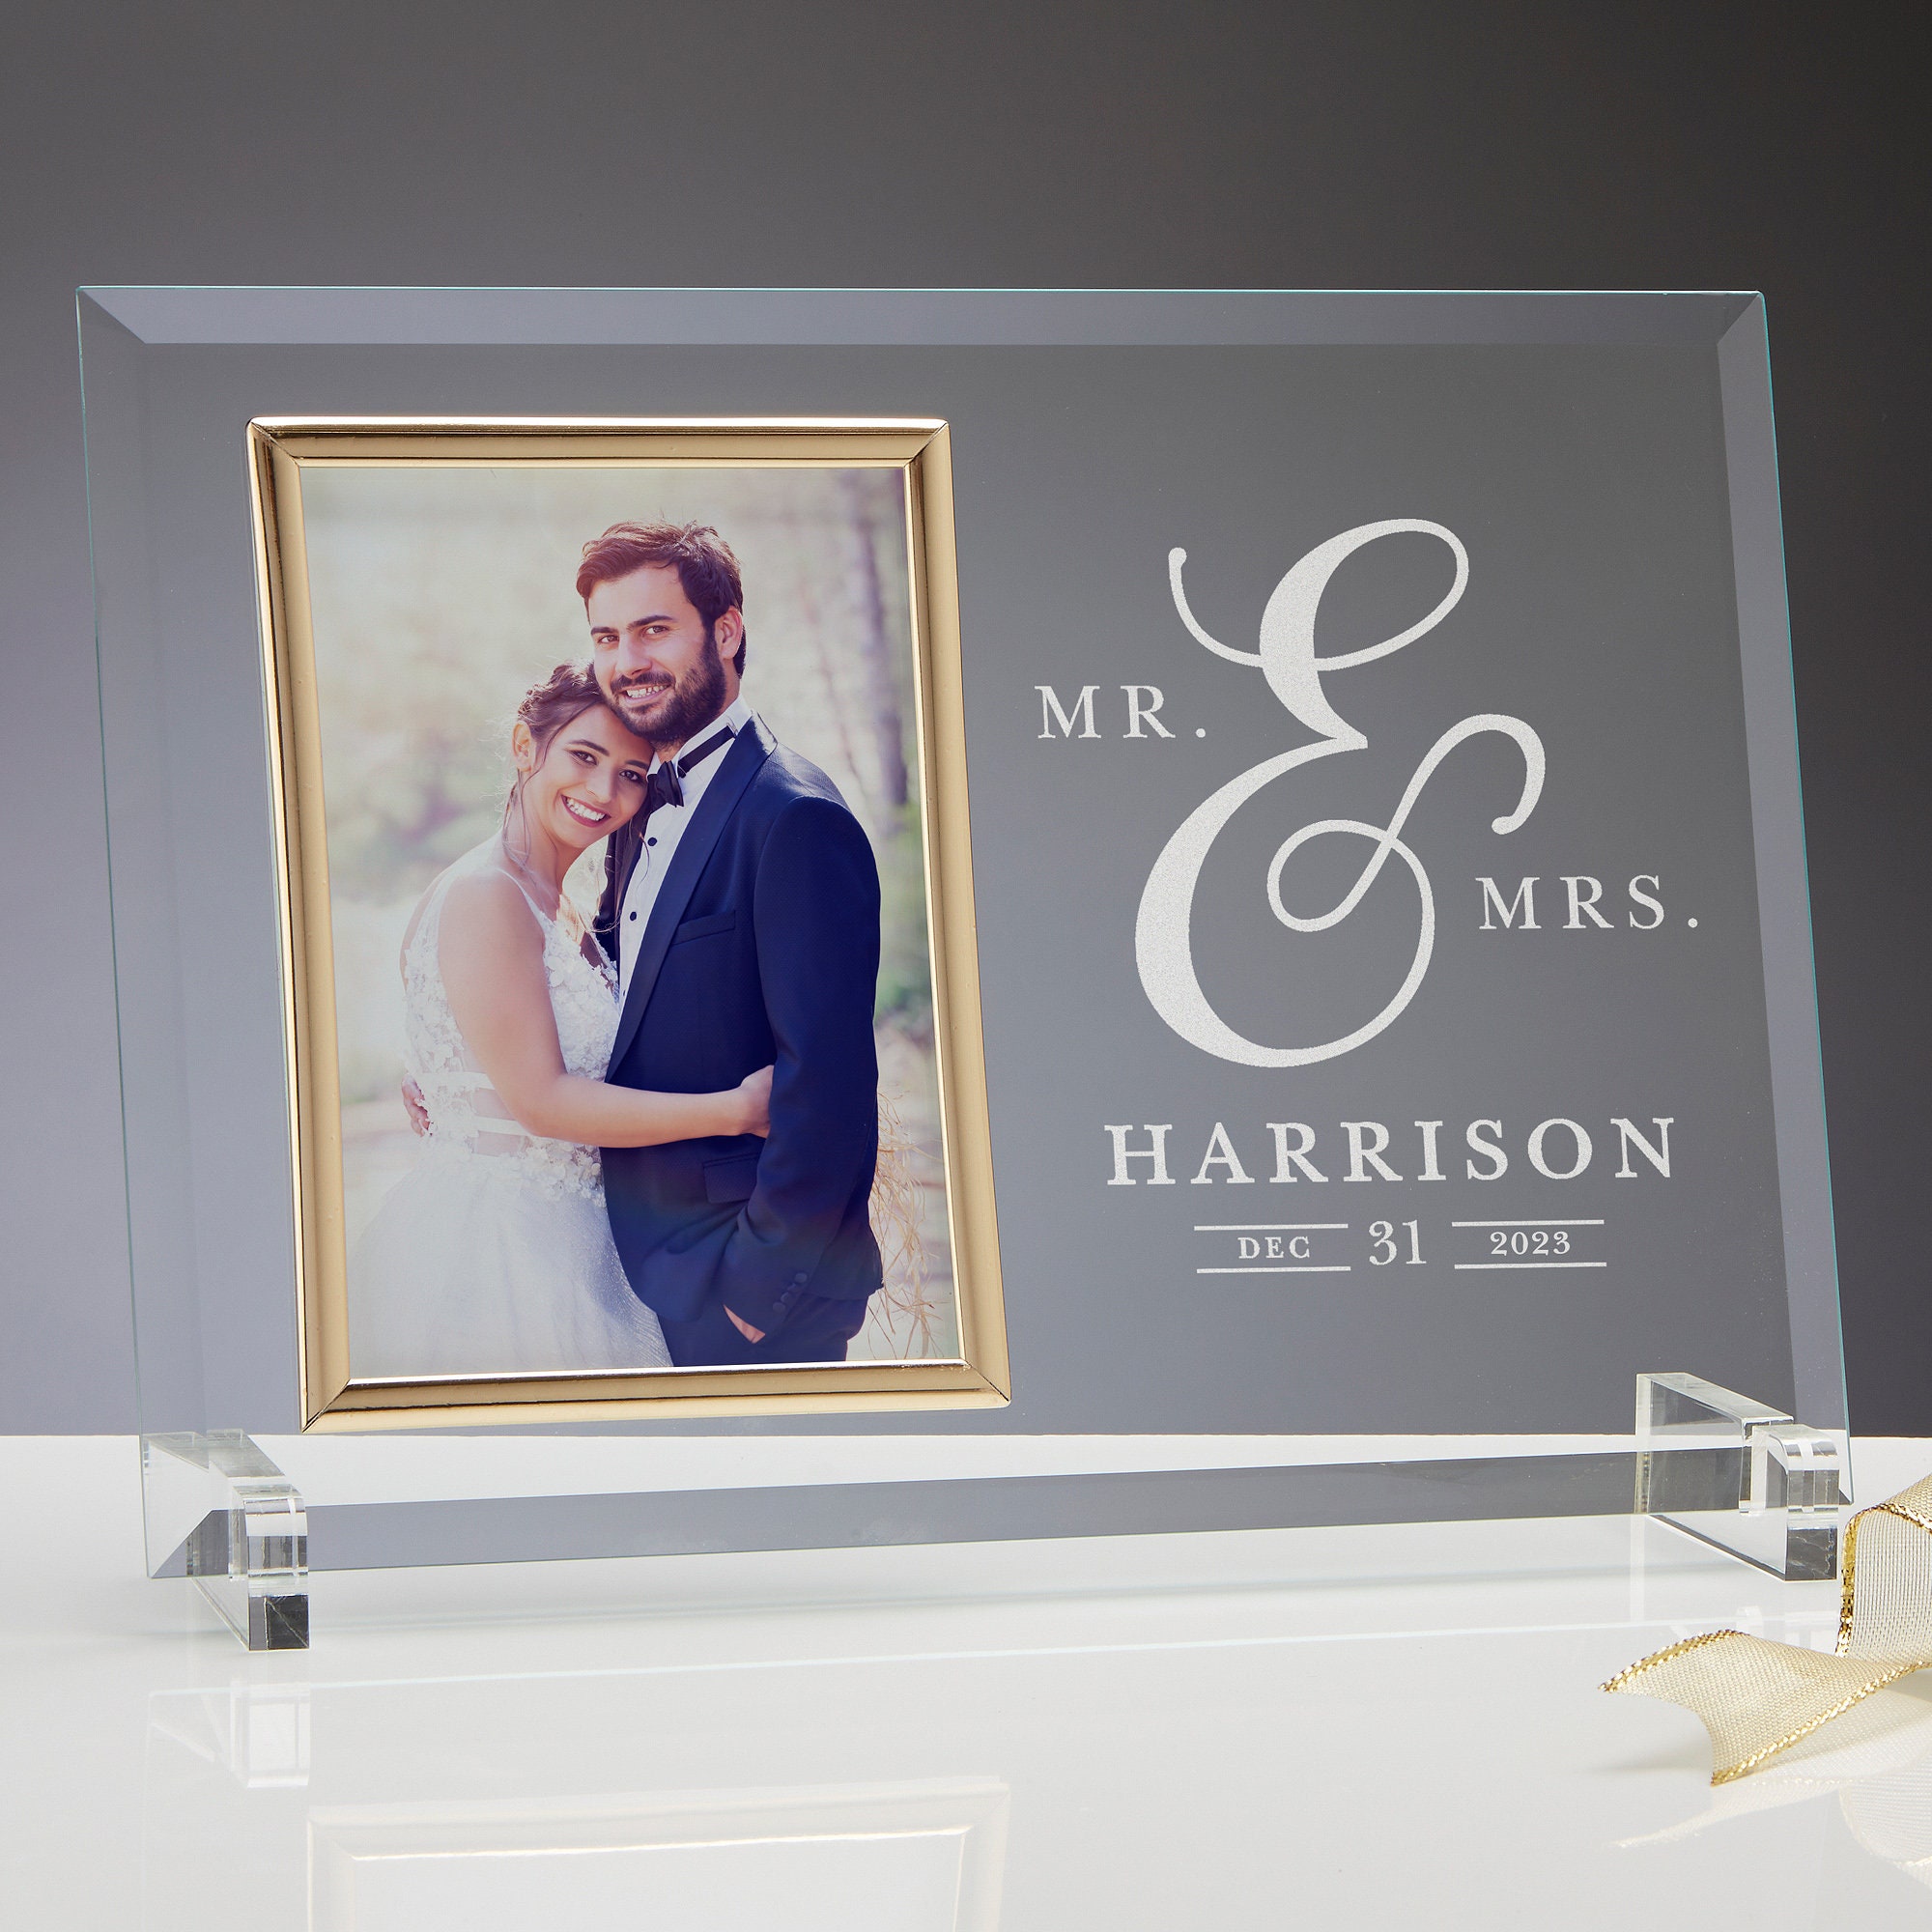 Personalized Wedding Gifts for the Couple, Photo Albums, Frames, Clocks